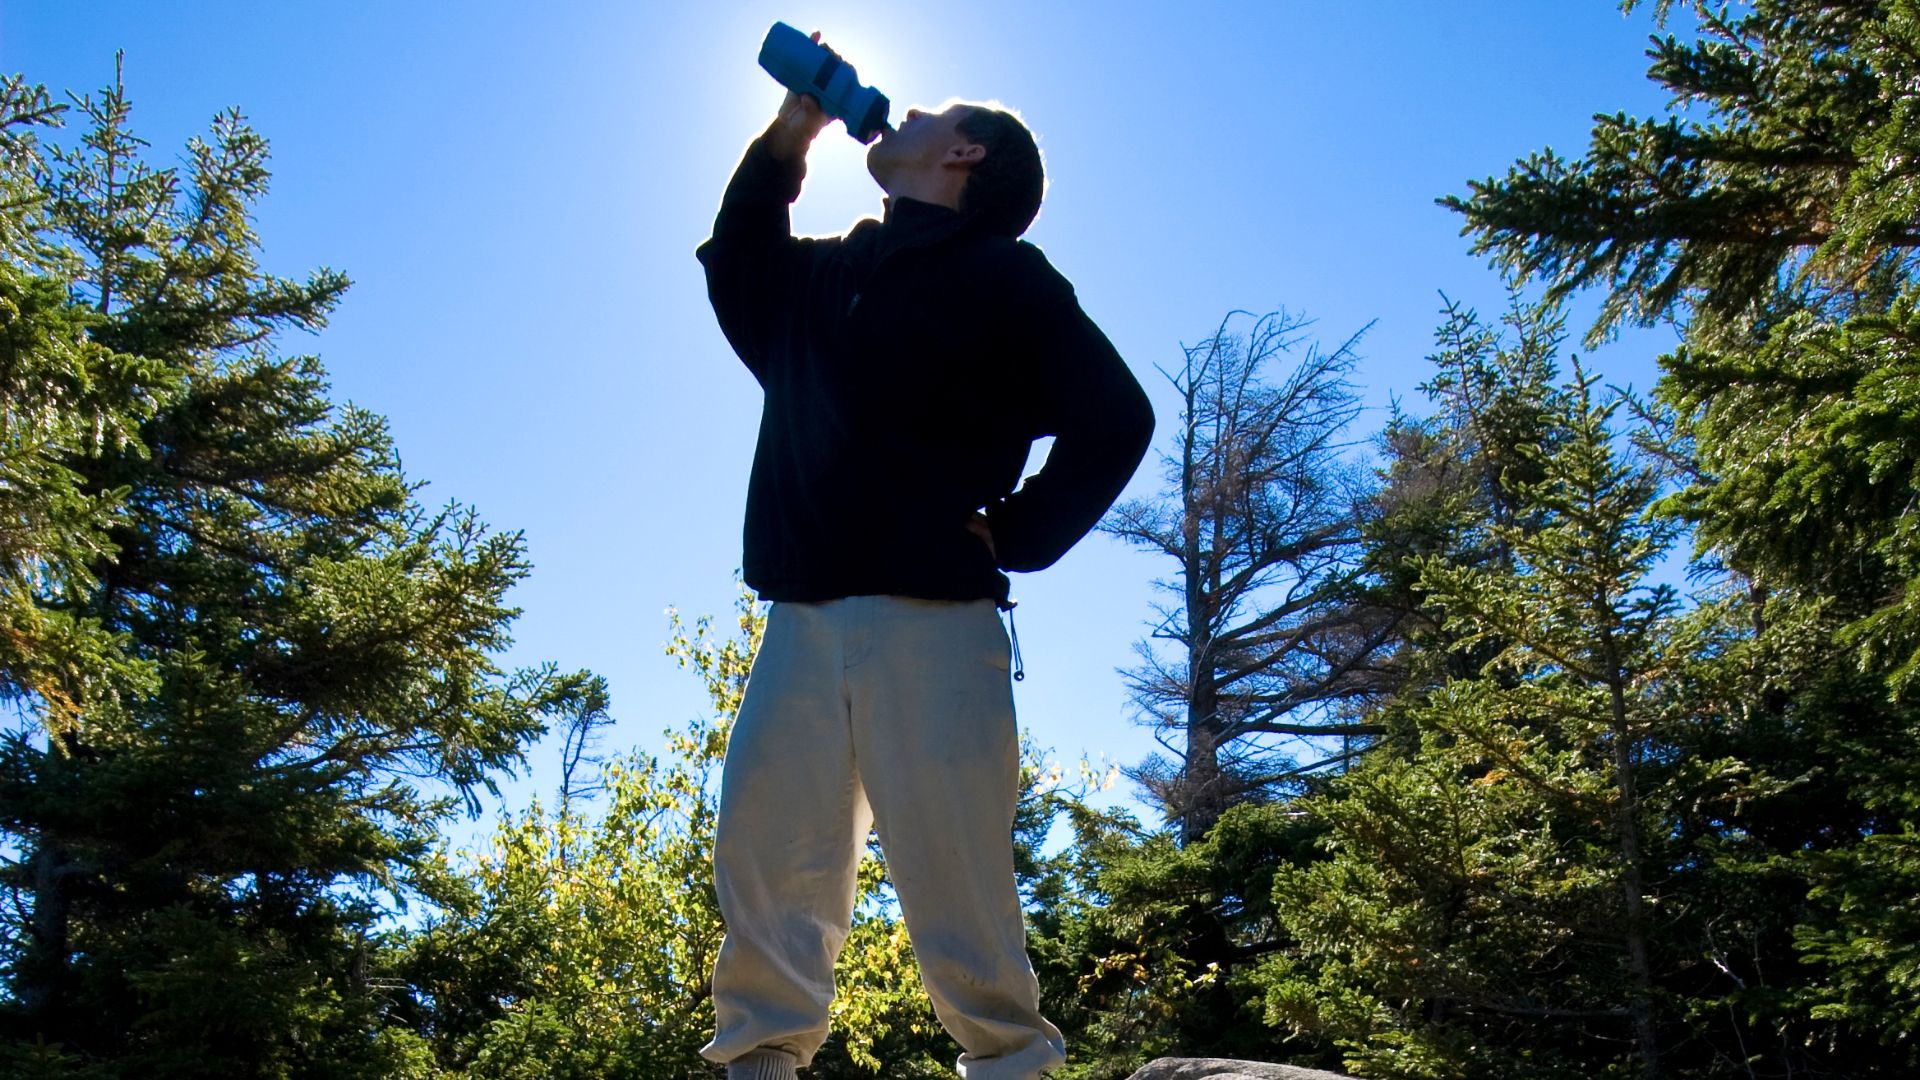 A man drinking from his water bottle while on a hike with the sun beaming behind him on a warm autumn day